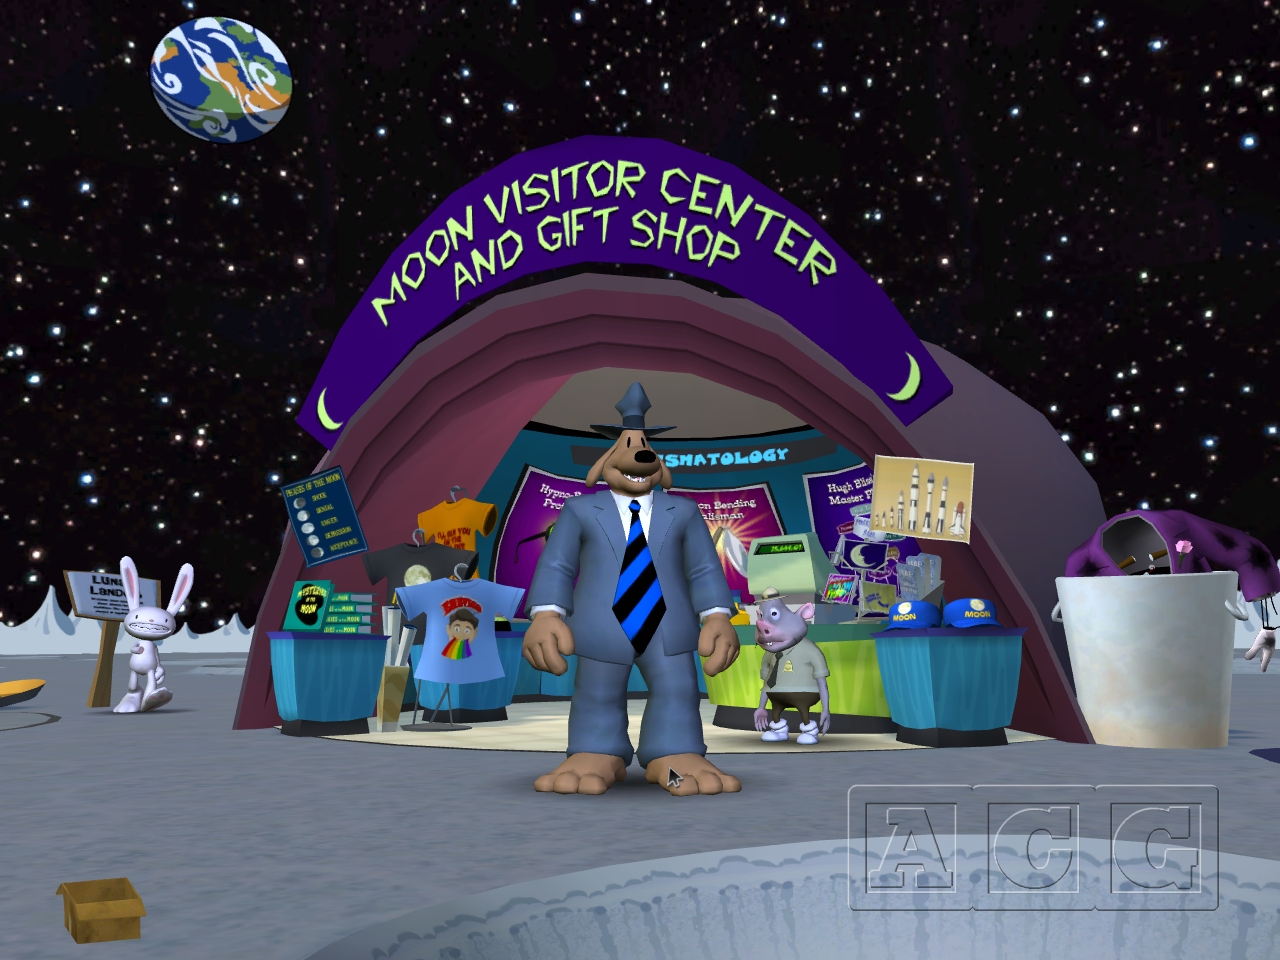 Sam & Max Save the World Episode 106: Bright Side of the Moon